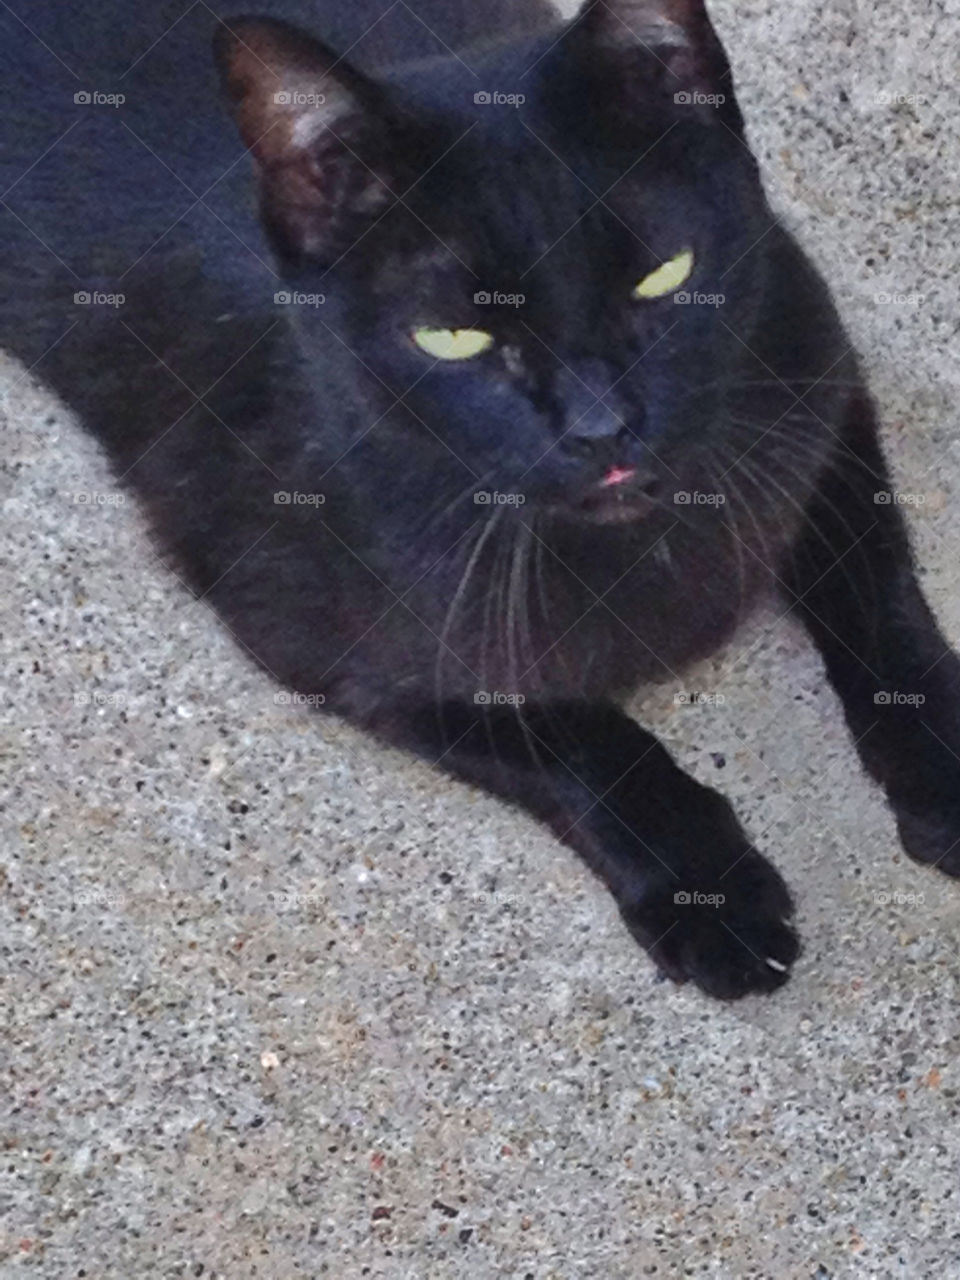 Black cat with a sarcastic face.